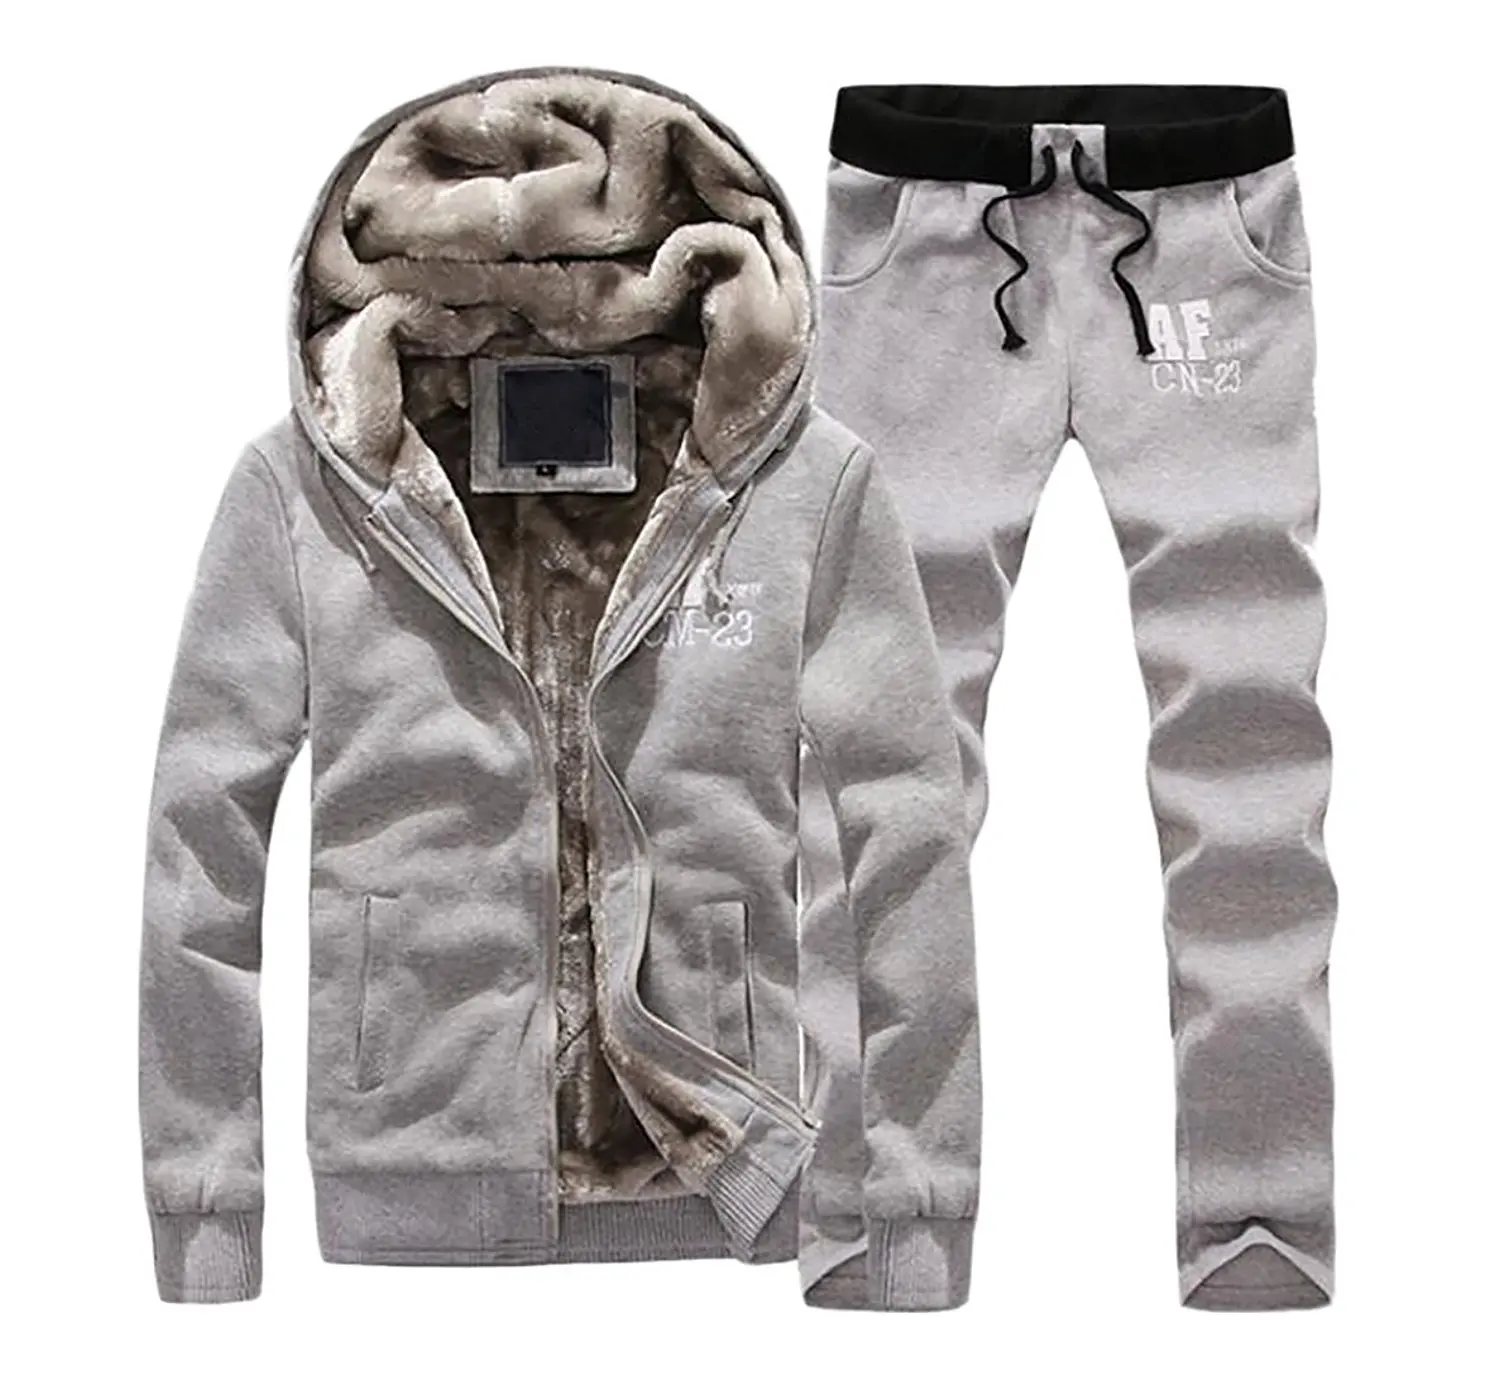 Buy SYTX Mens Winter Hooded Fleece Sweatsuits Jogger Athletic ...